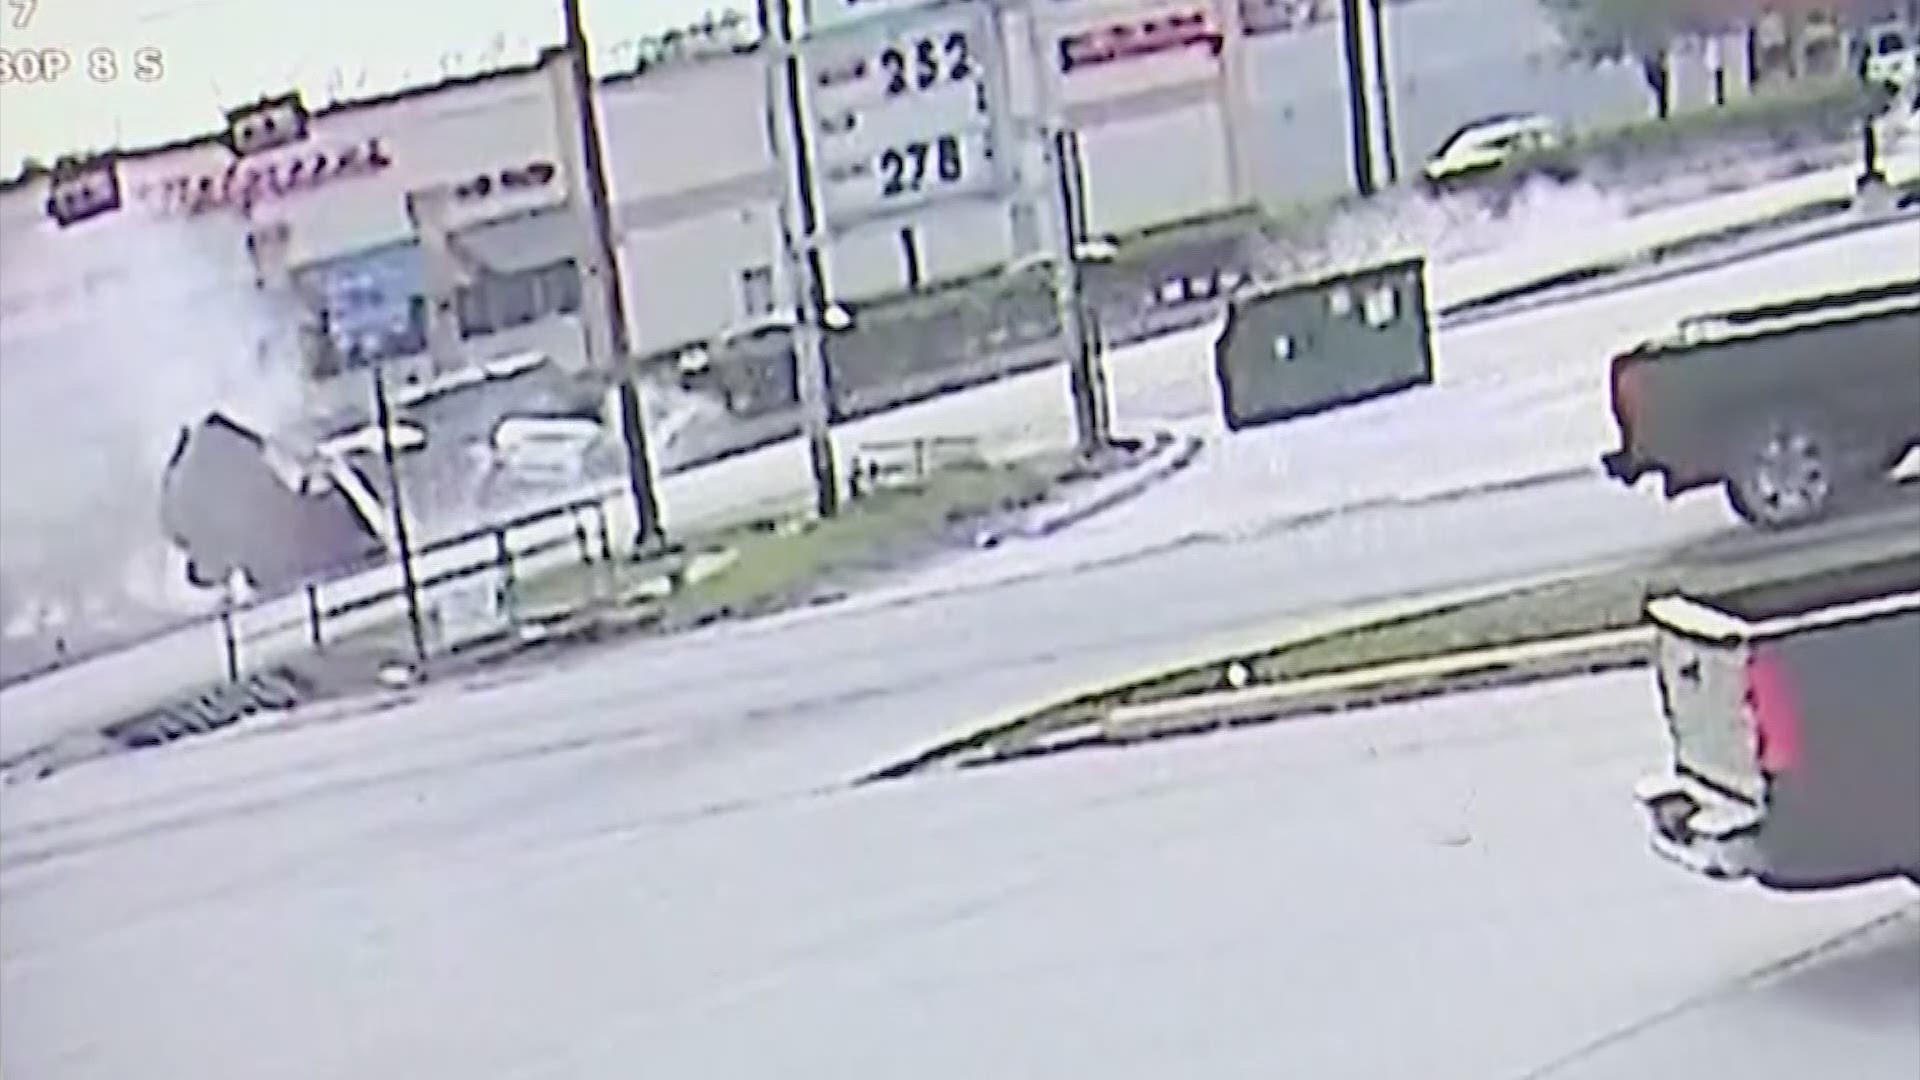 Surveillance video shows a crash in Aldine that killed a 30-year-old woman. Officials say a 14-year-old driver is to blame for the crash.